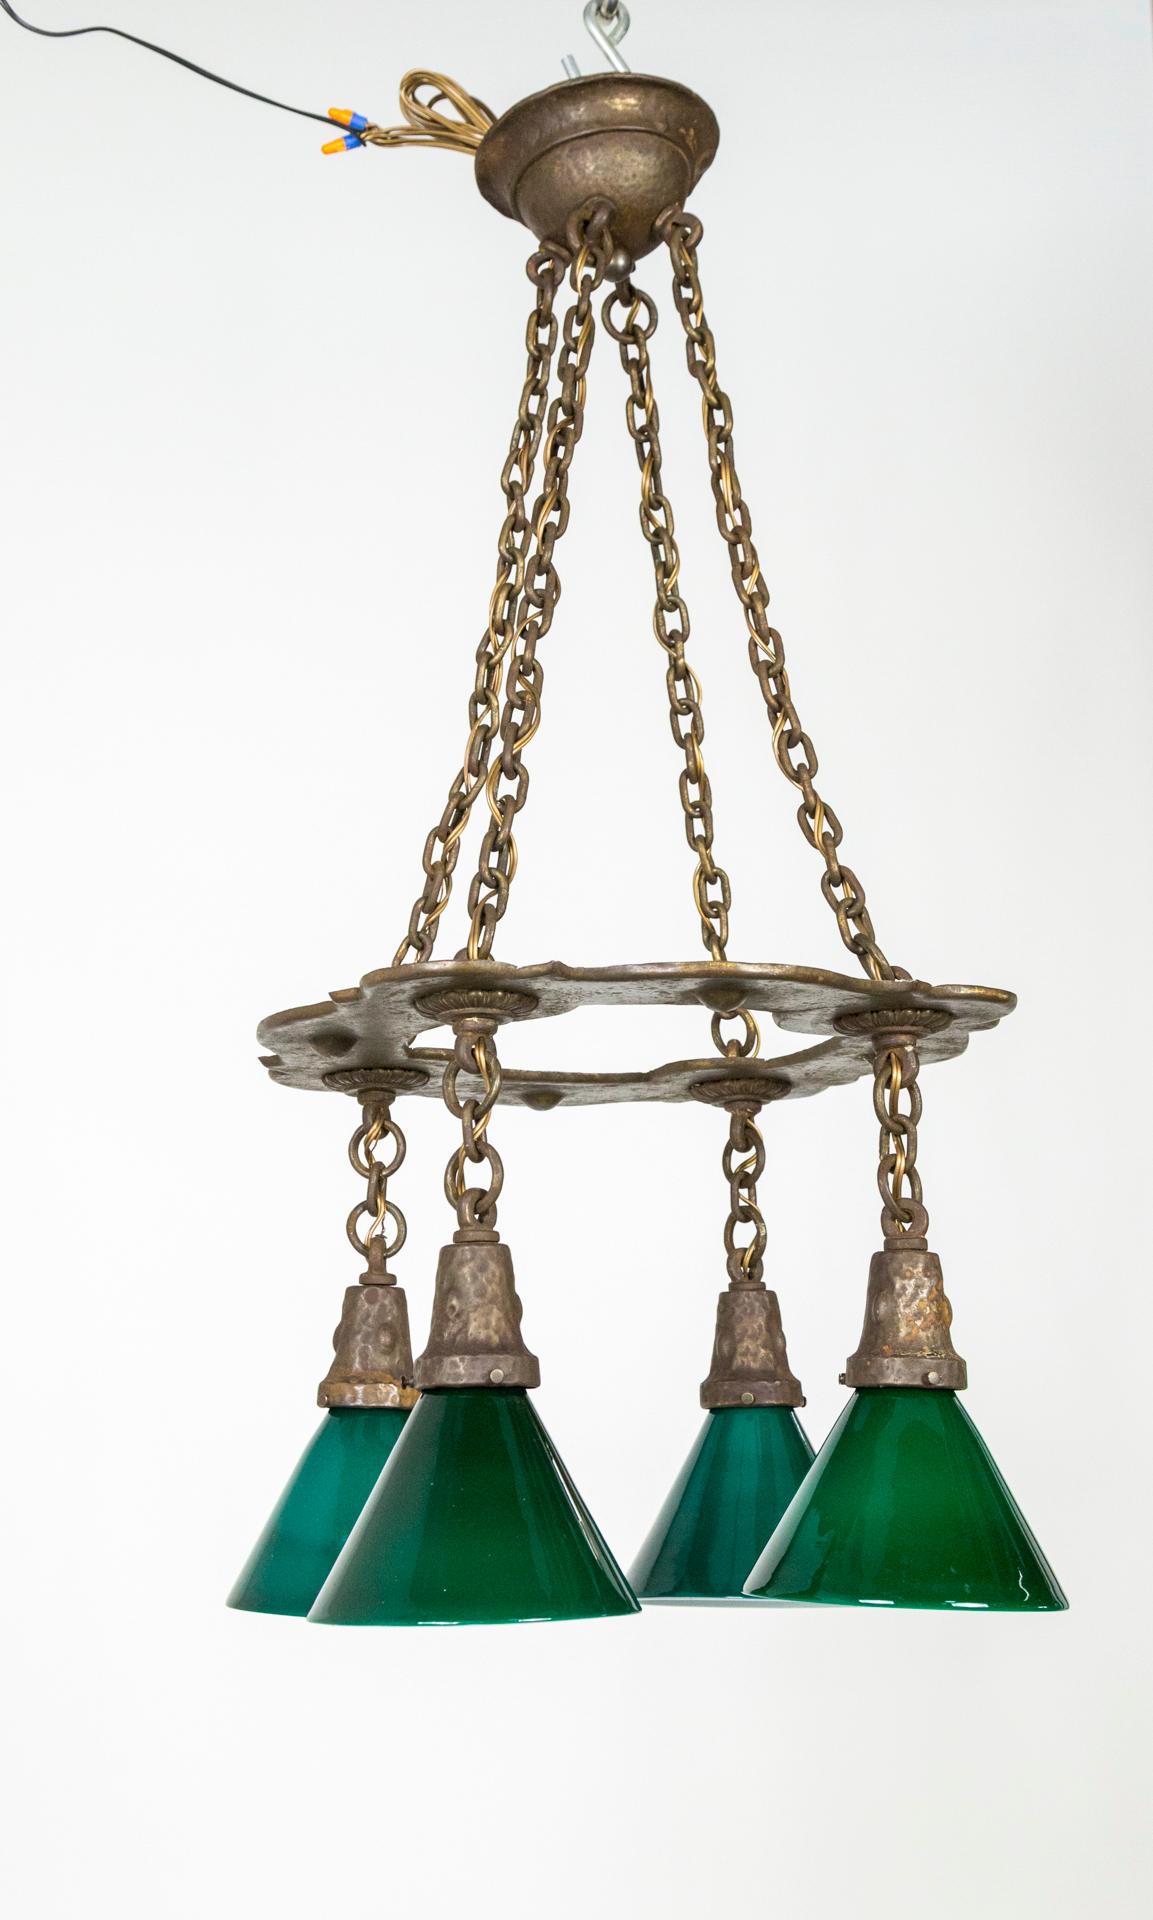 20th Century Arts & Crafts Hammered Darkened Metal Chandelier with Green Glass Shades For Sale